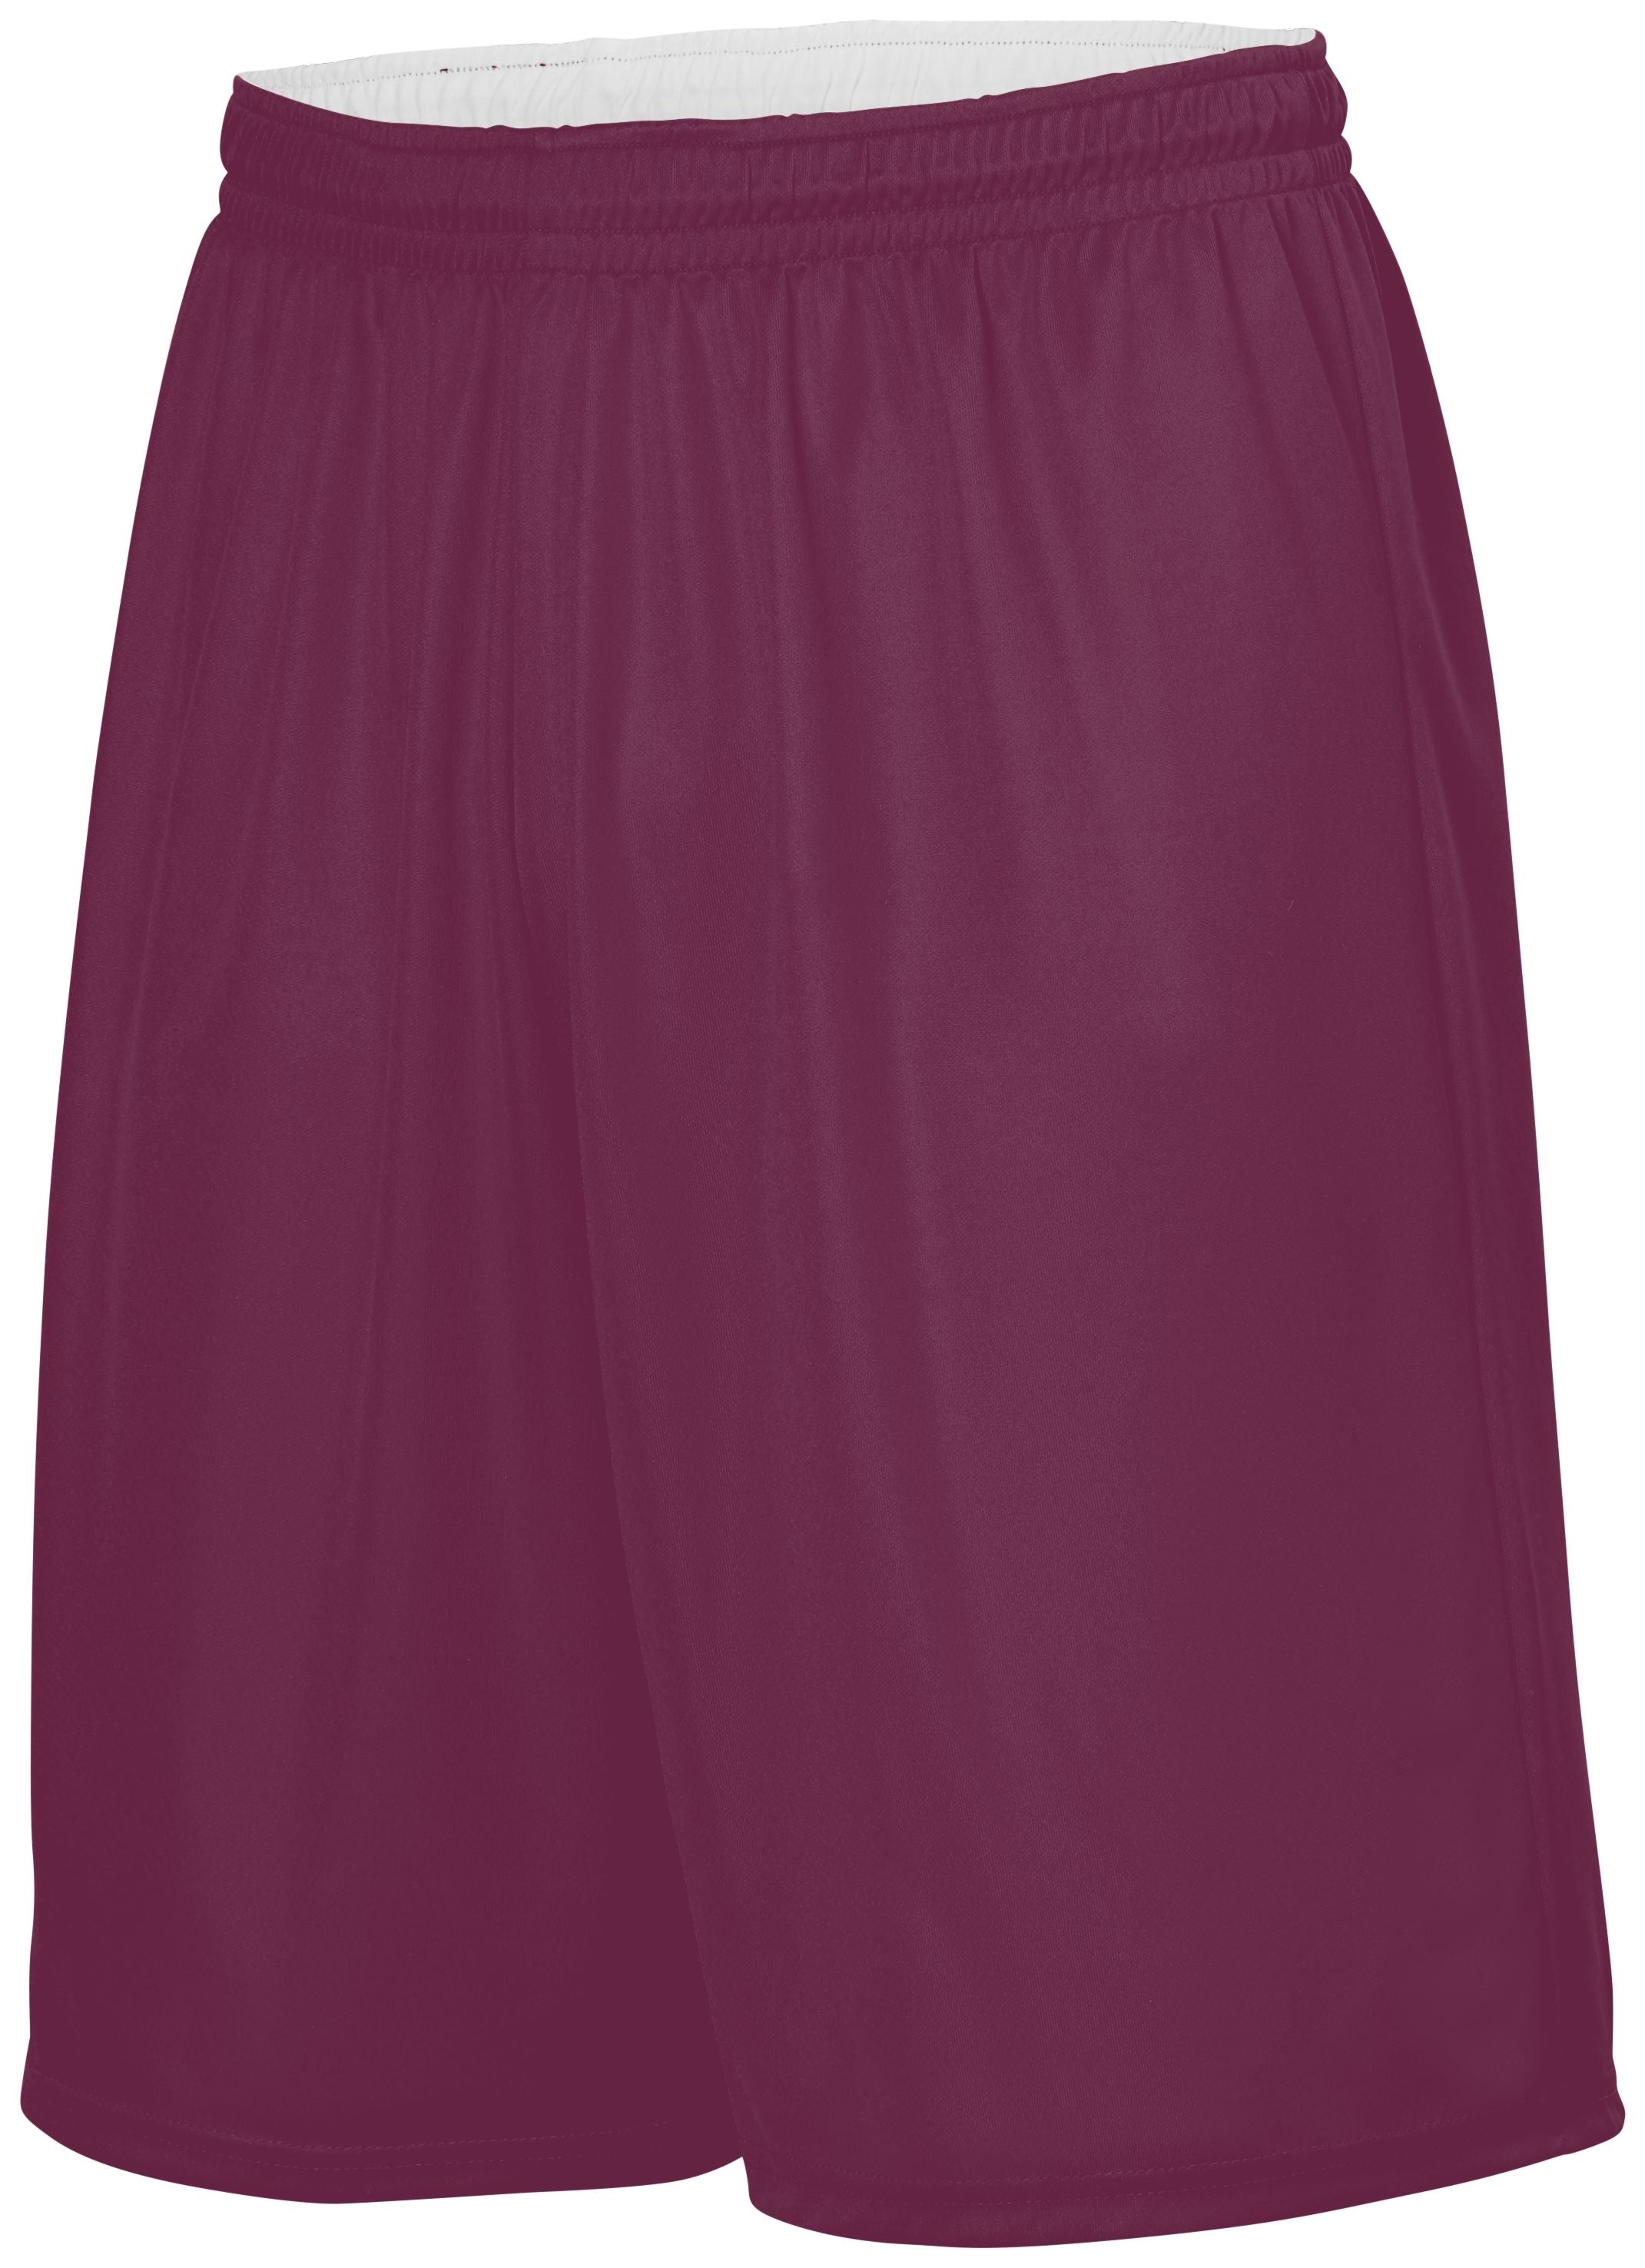 Augusta Sportswear Youth Reversible Wicking Shorts in Light Maroon/White  -Part of the Youth, Youth-Shorts, Augusta-Products, Basketball, All-Sports, All-Sports-1 product lines at KanaleyCreations.com